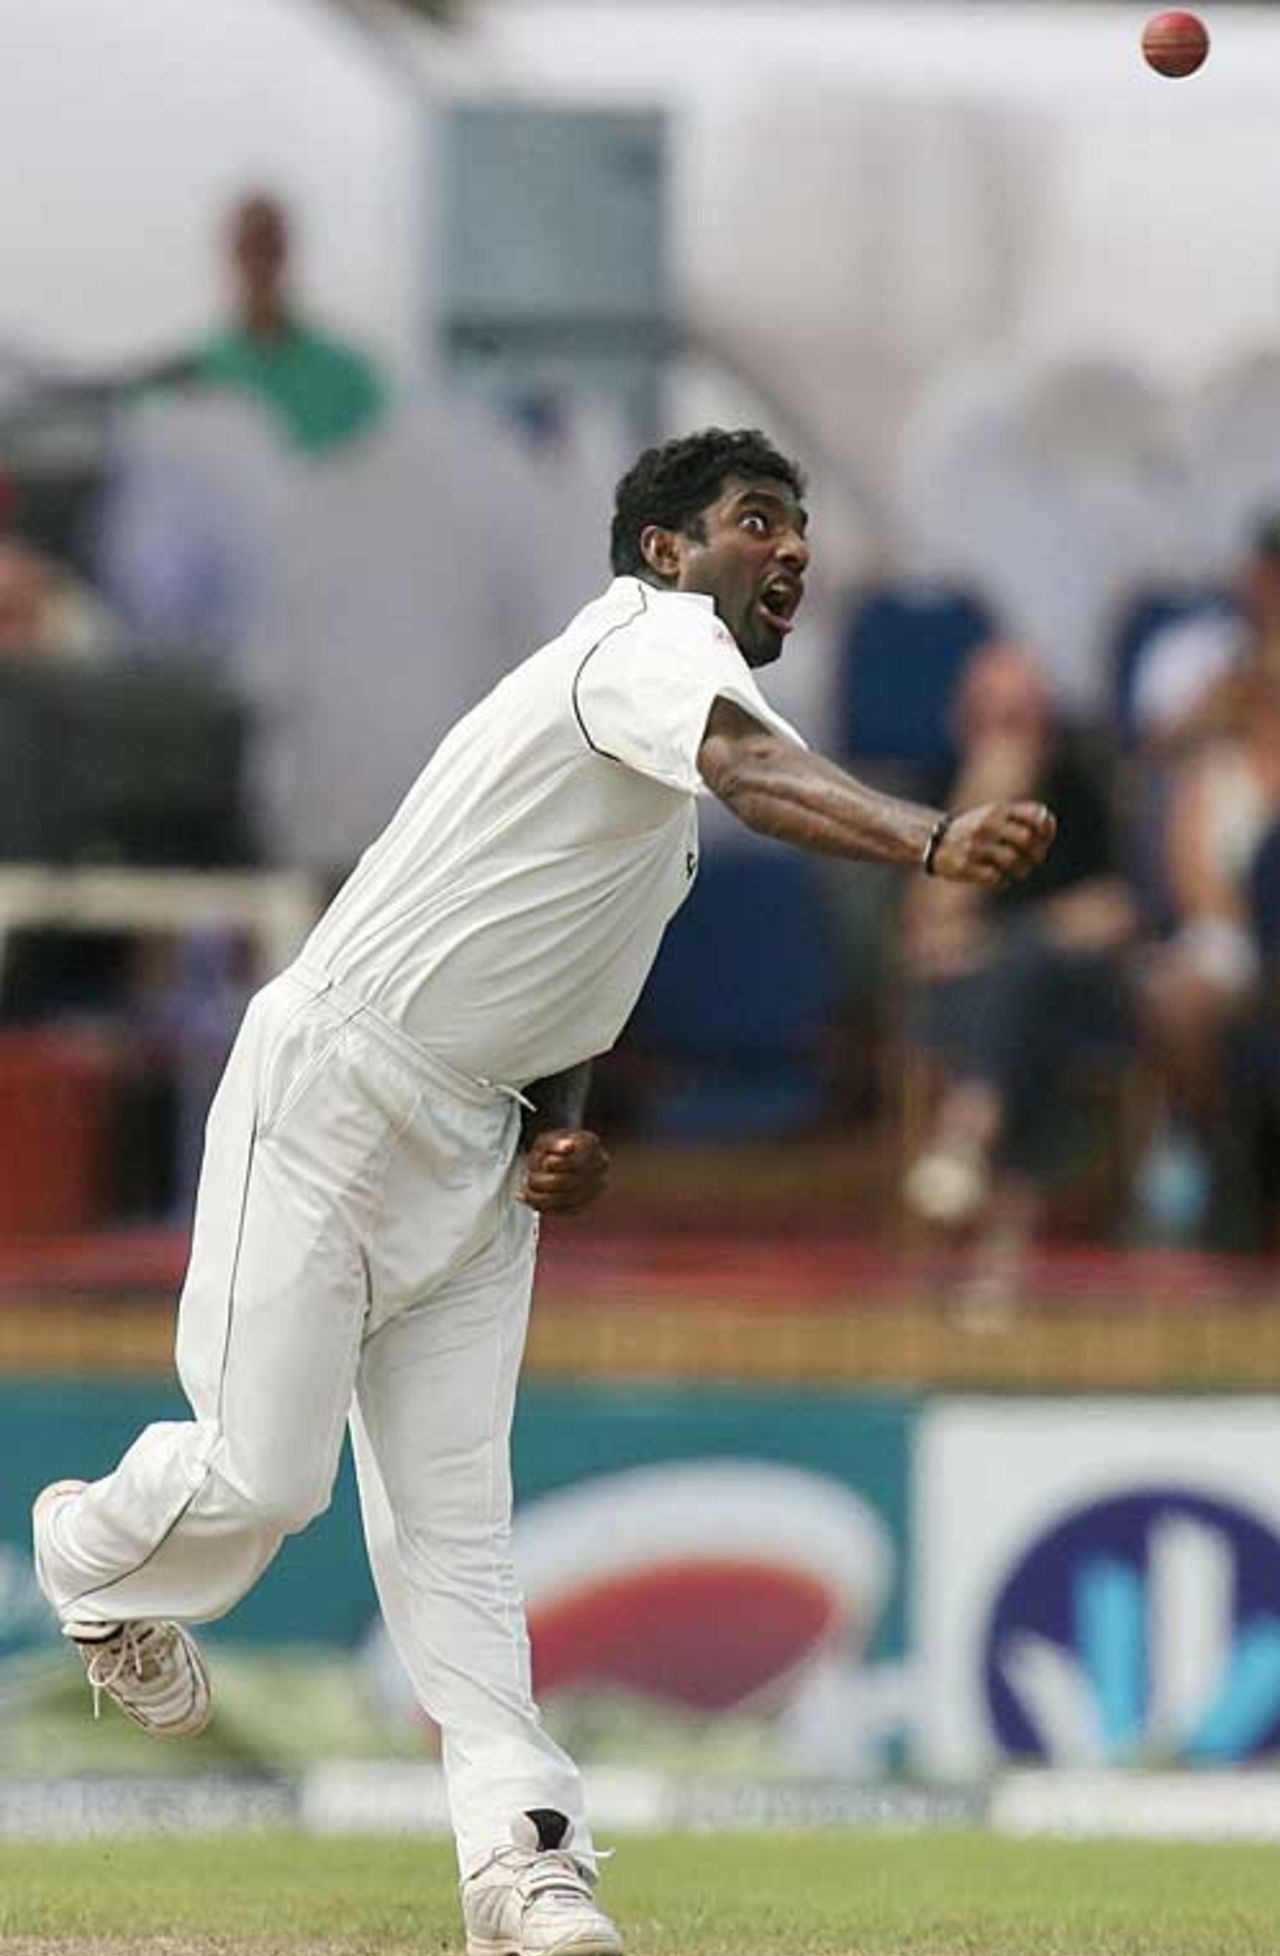 Muttiah Muralitharan caused havoc in England's middle order, Sri Lanka v England, 3rd Test, Galle, 5th day, December 22 2007